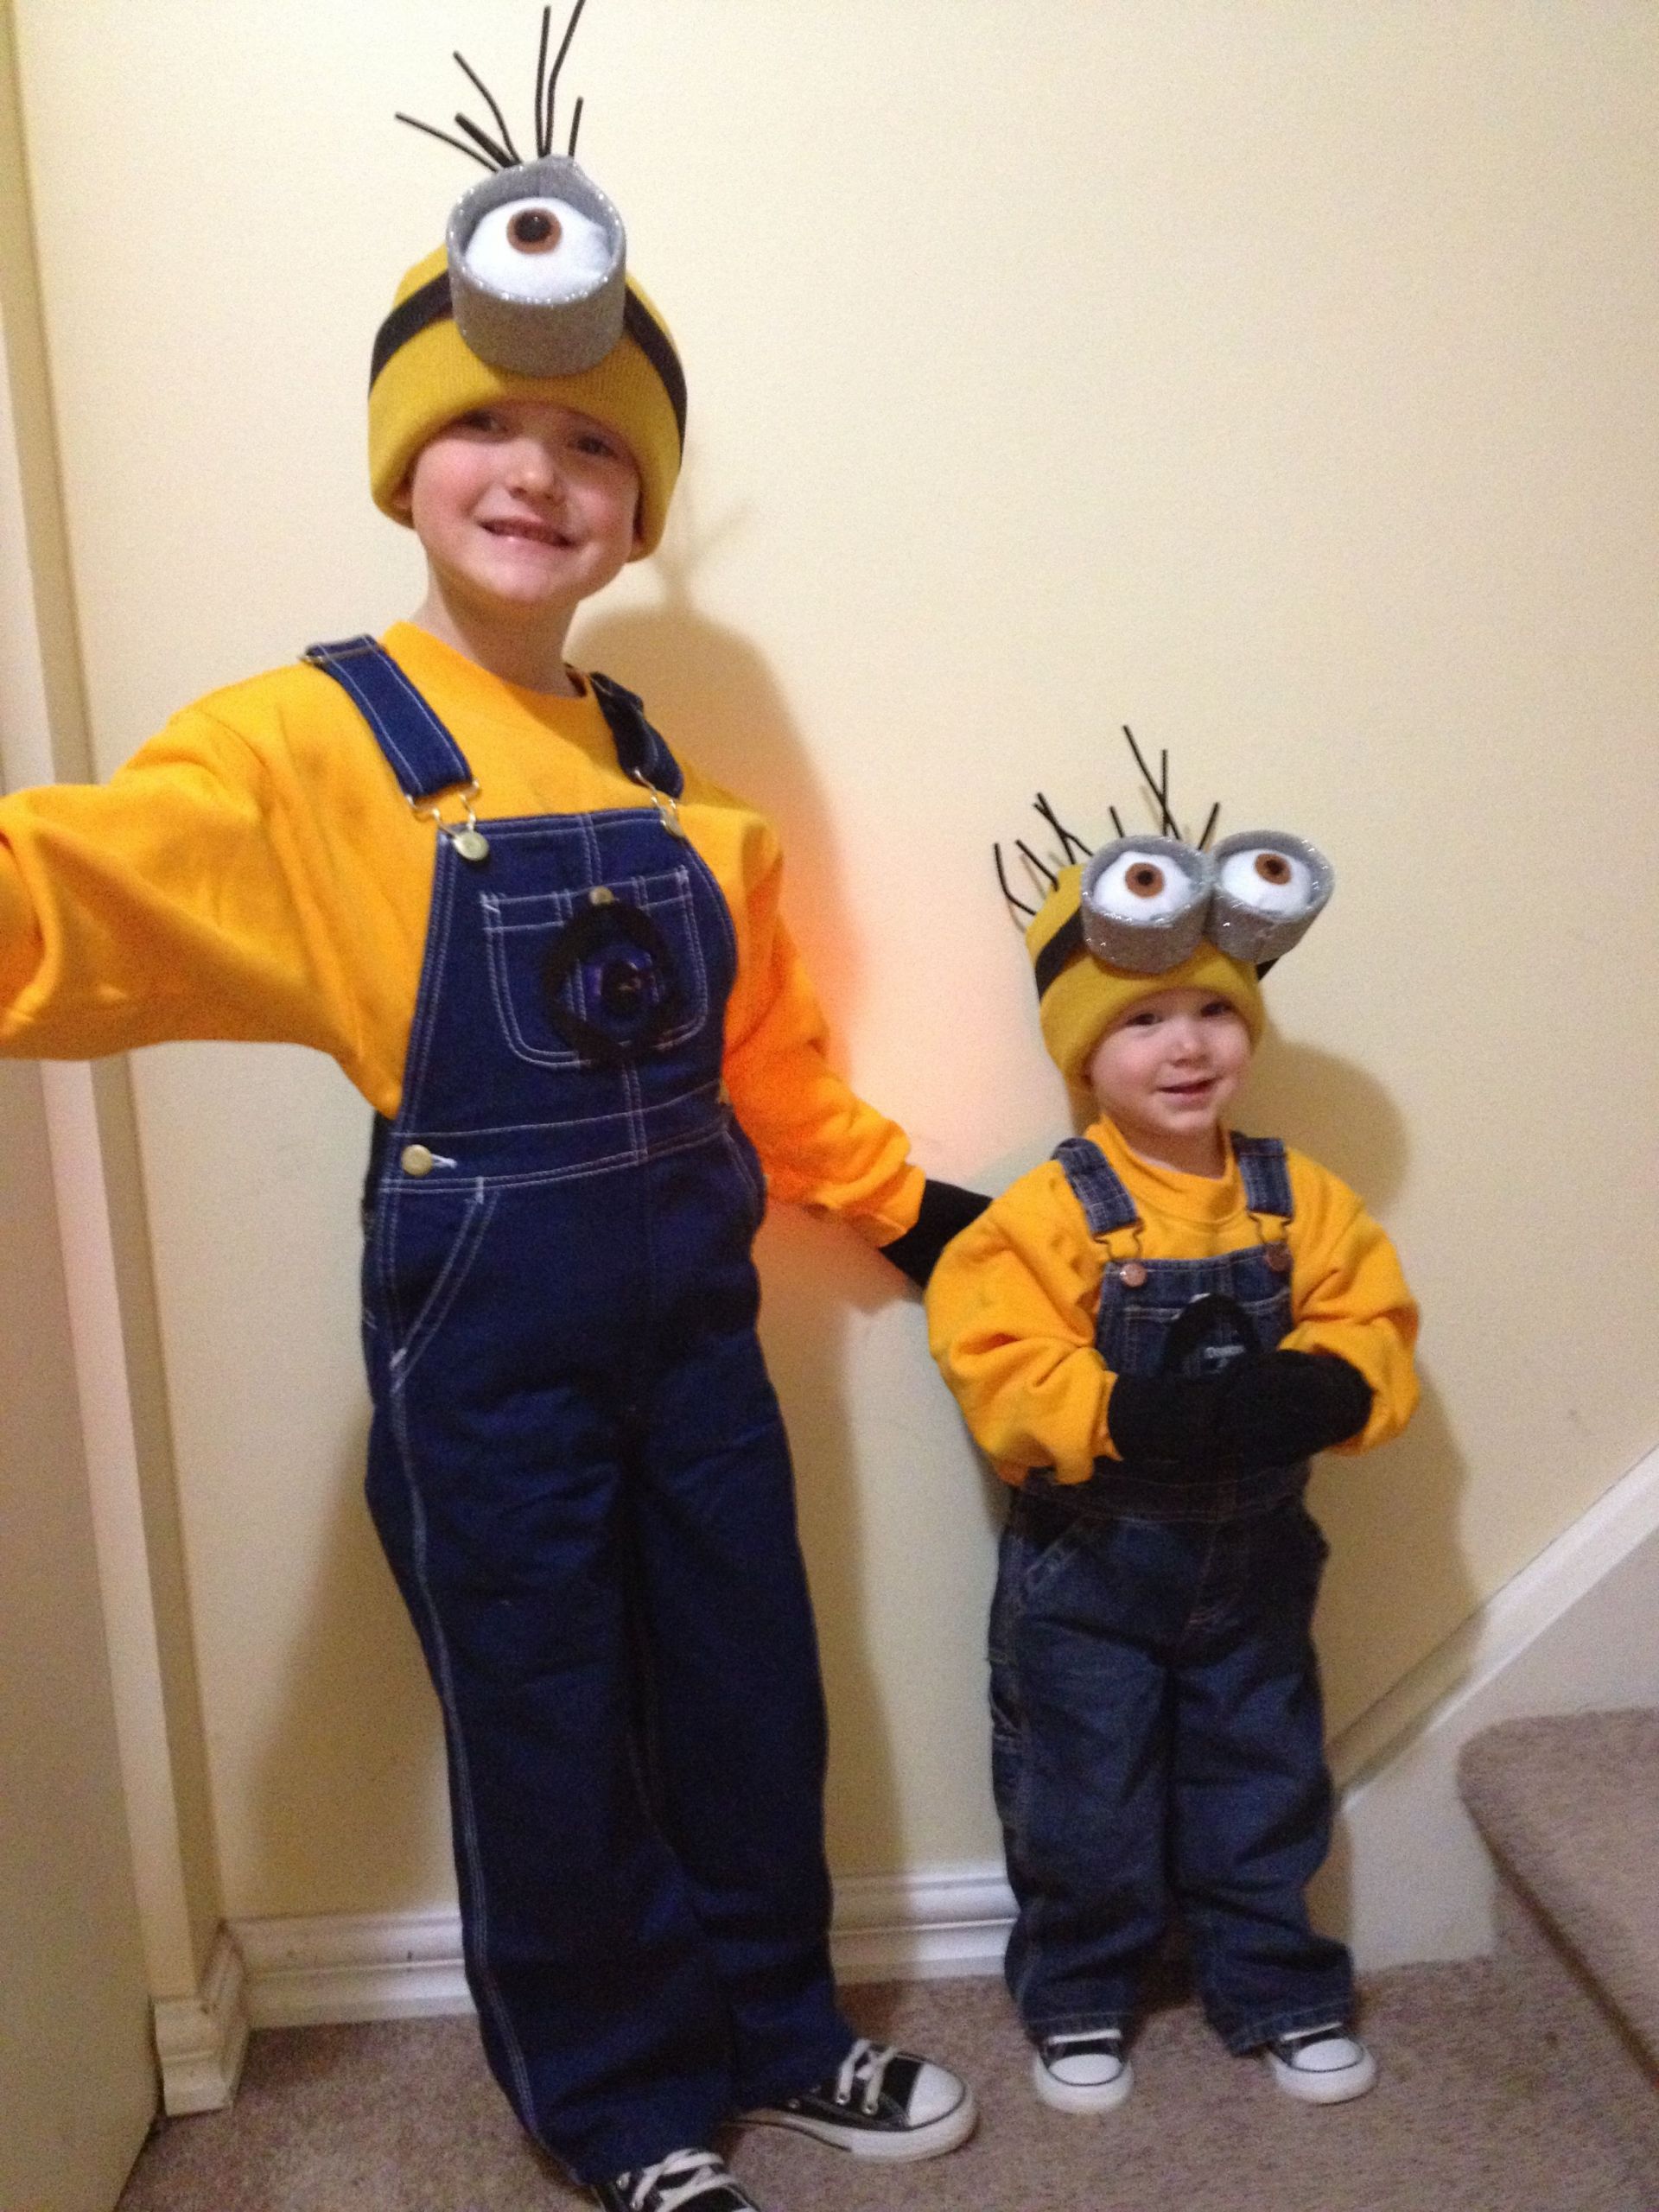 DIY Minion Costume For Toddler
 Minion costume Despicable Me Maybe Gavin will want to be